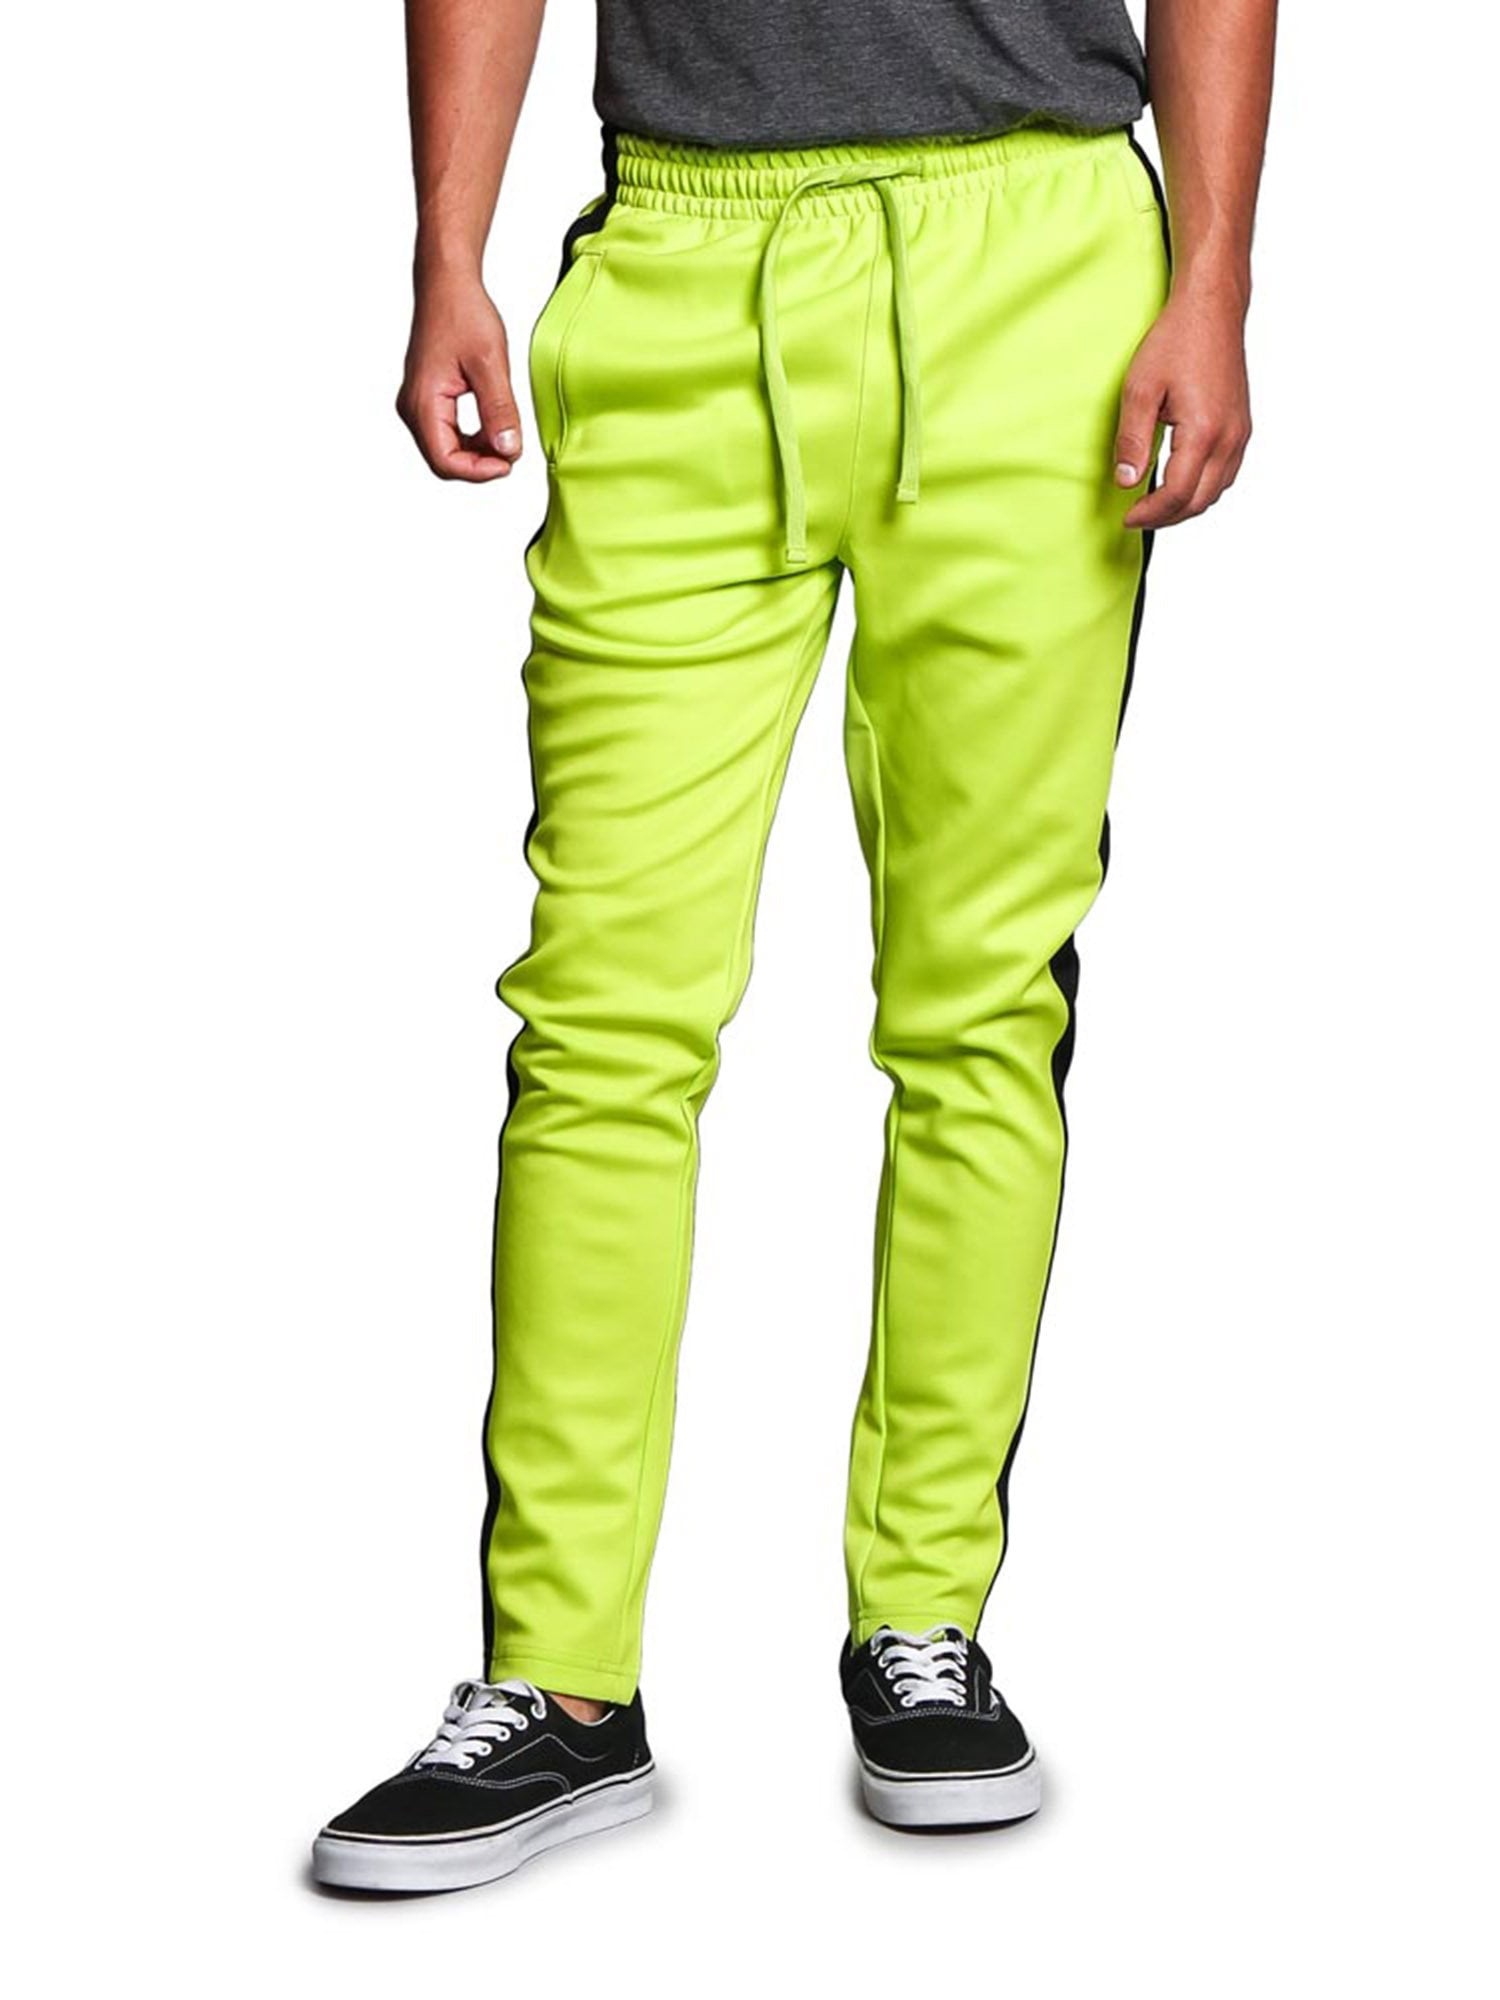 yellow pants with black side stripe